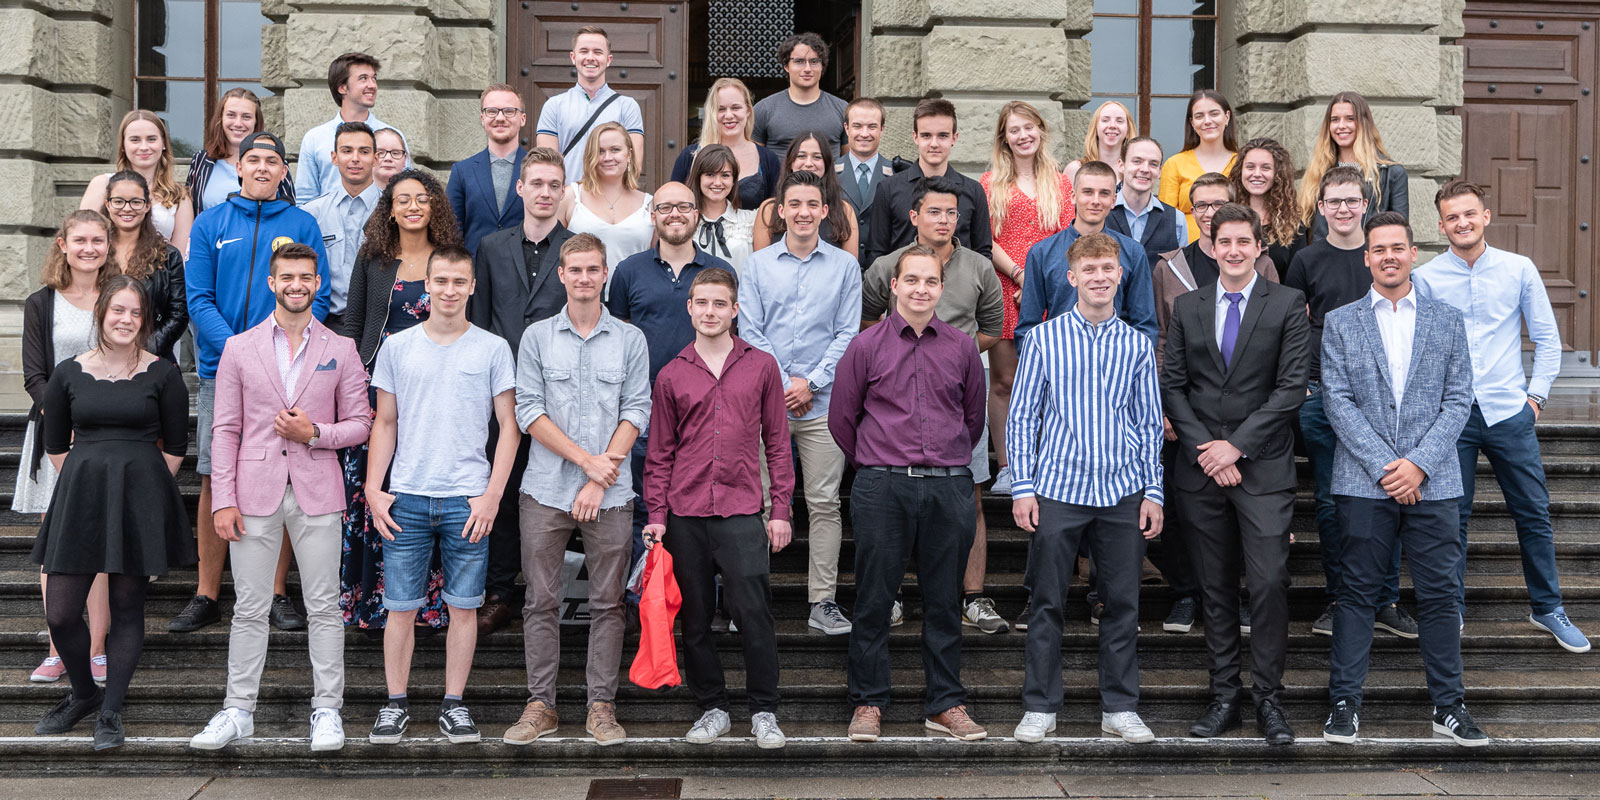 Enlarged view: As part of the 2019 apprentice graduation ceremony, forty-nine young pg professionals celebrated completingrofessionals celebrated completing their vocational training at ETH Zurich on Thursday. (Photo: ETH Zurich / Cornel Andreoli)